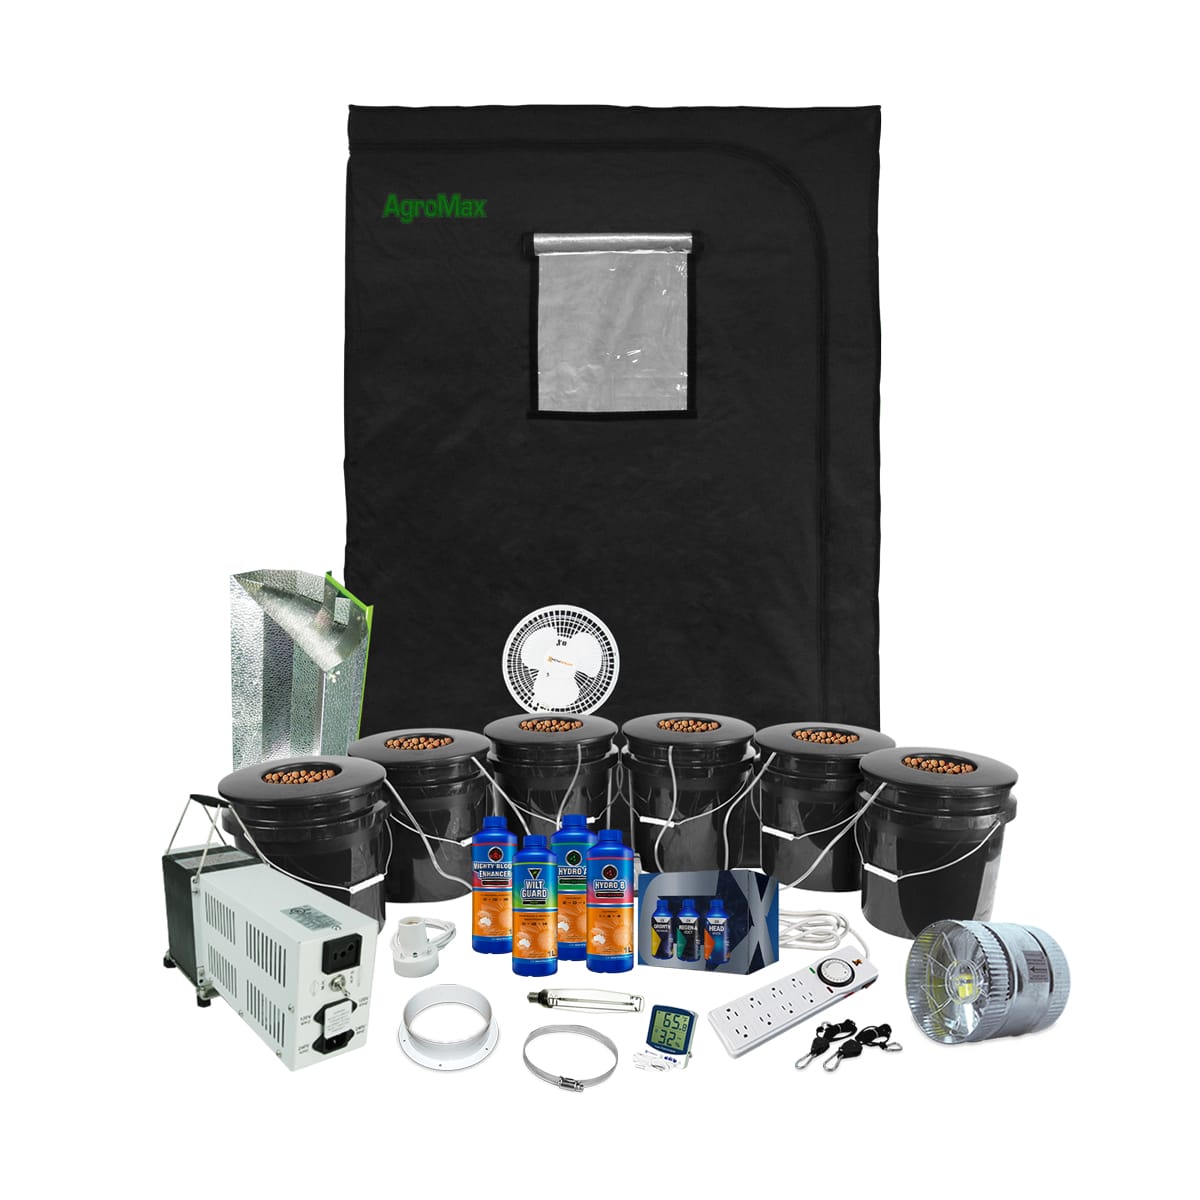 Hydroponics & Growers - GROW TENTS - Advance Grow Tents - Page 1